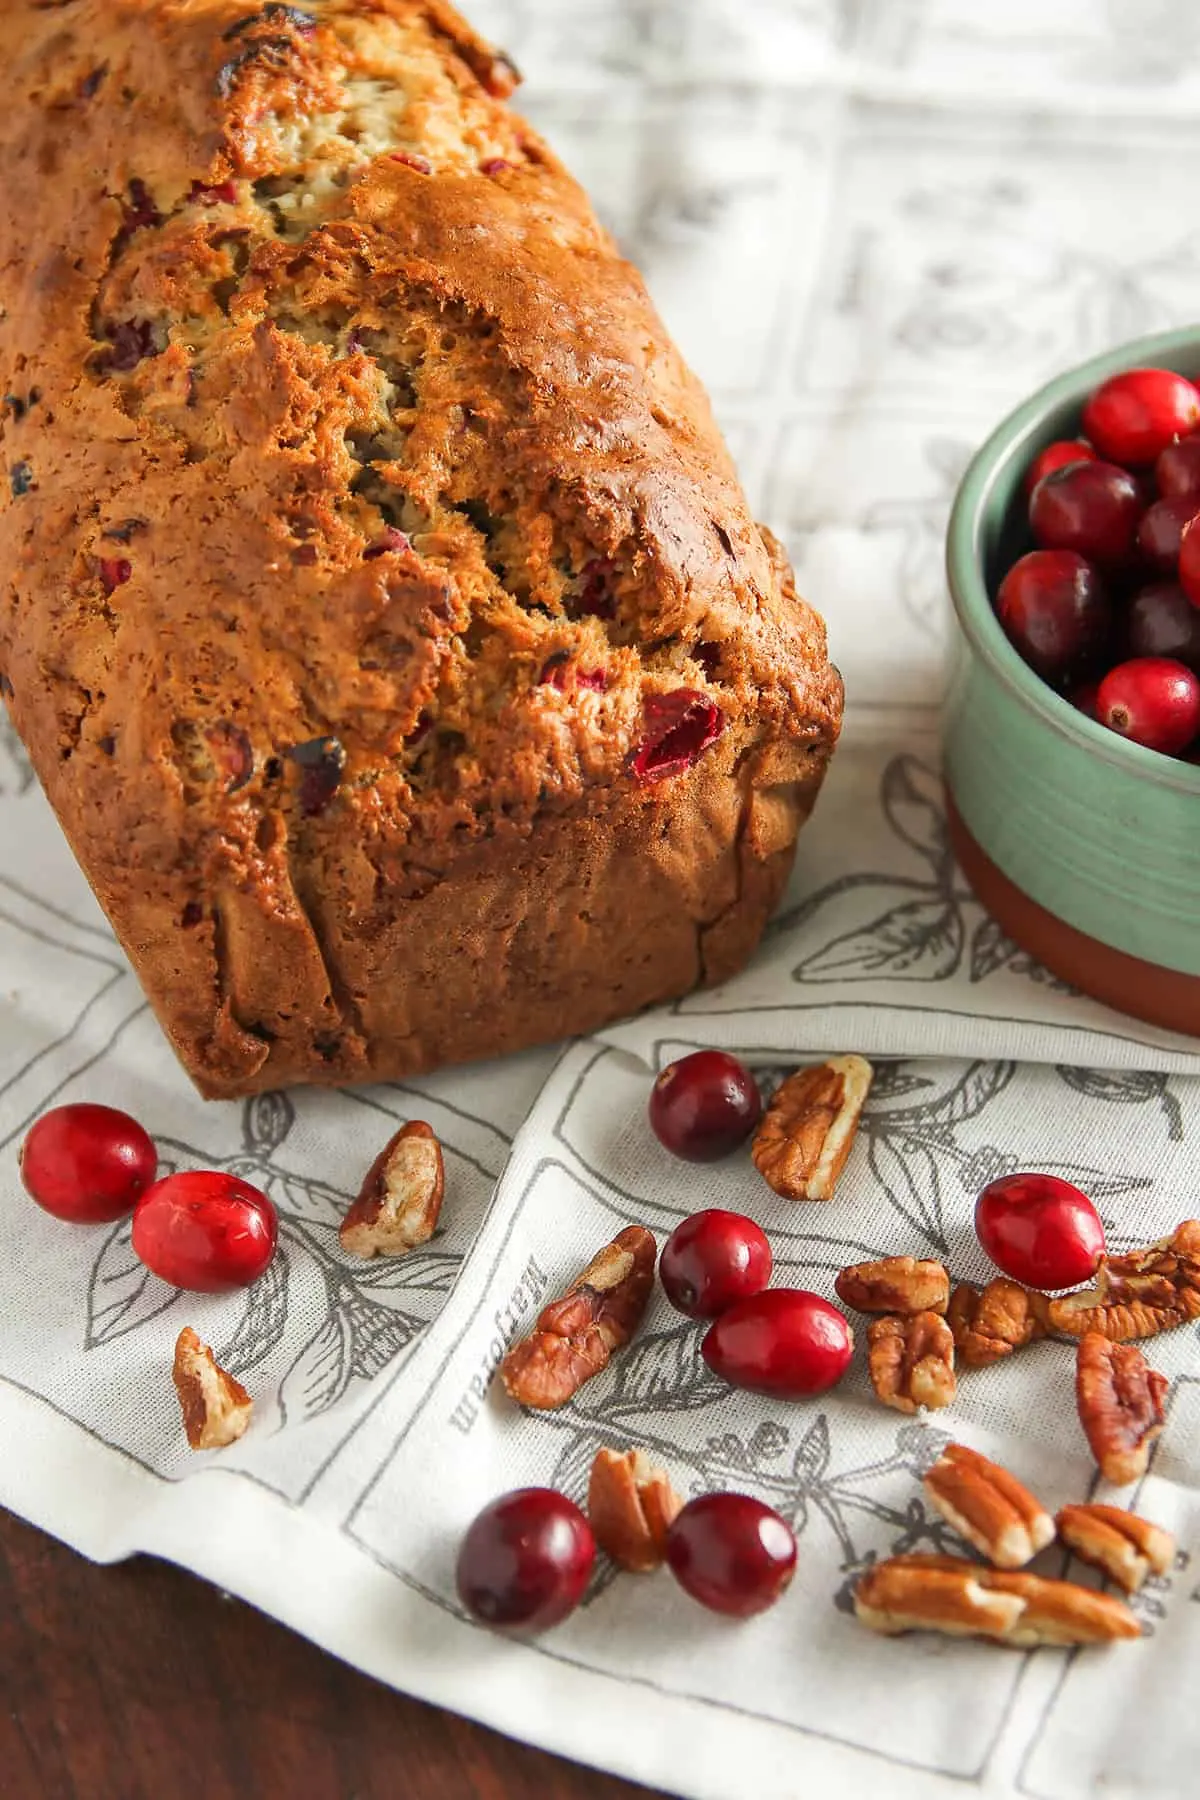 Cranberry Nut Bread is a delicious quick bread for the holiday season. Chock full of fresh cranberries and pecans, this is an easy quick bread you’ll want to make again and again.